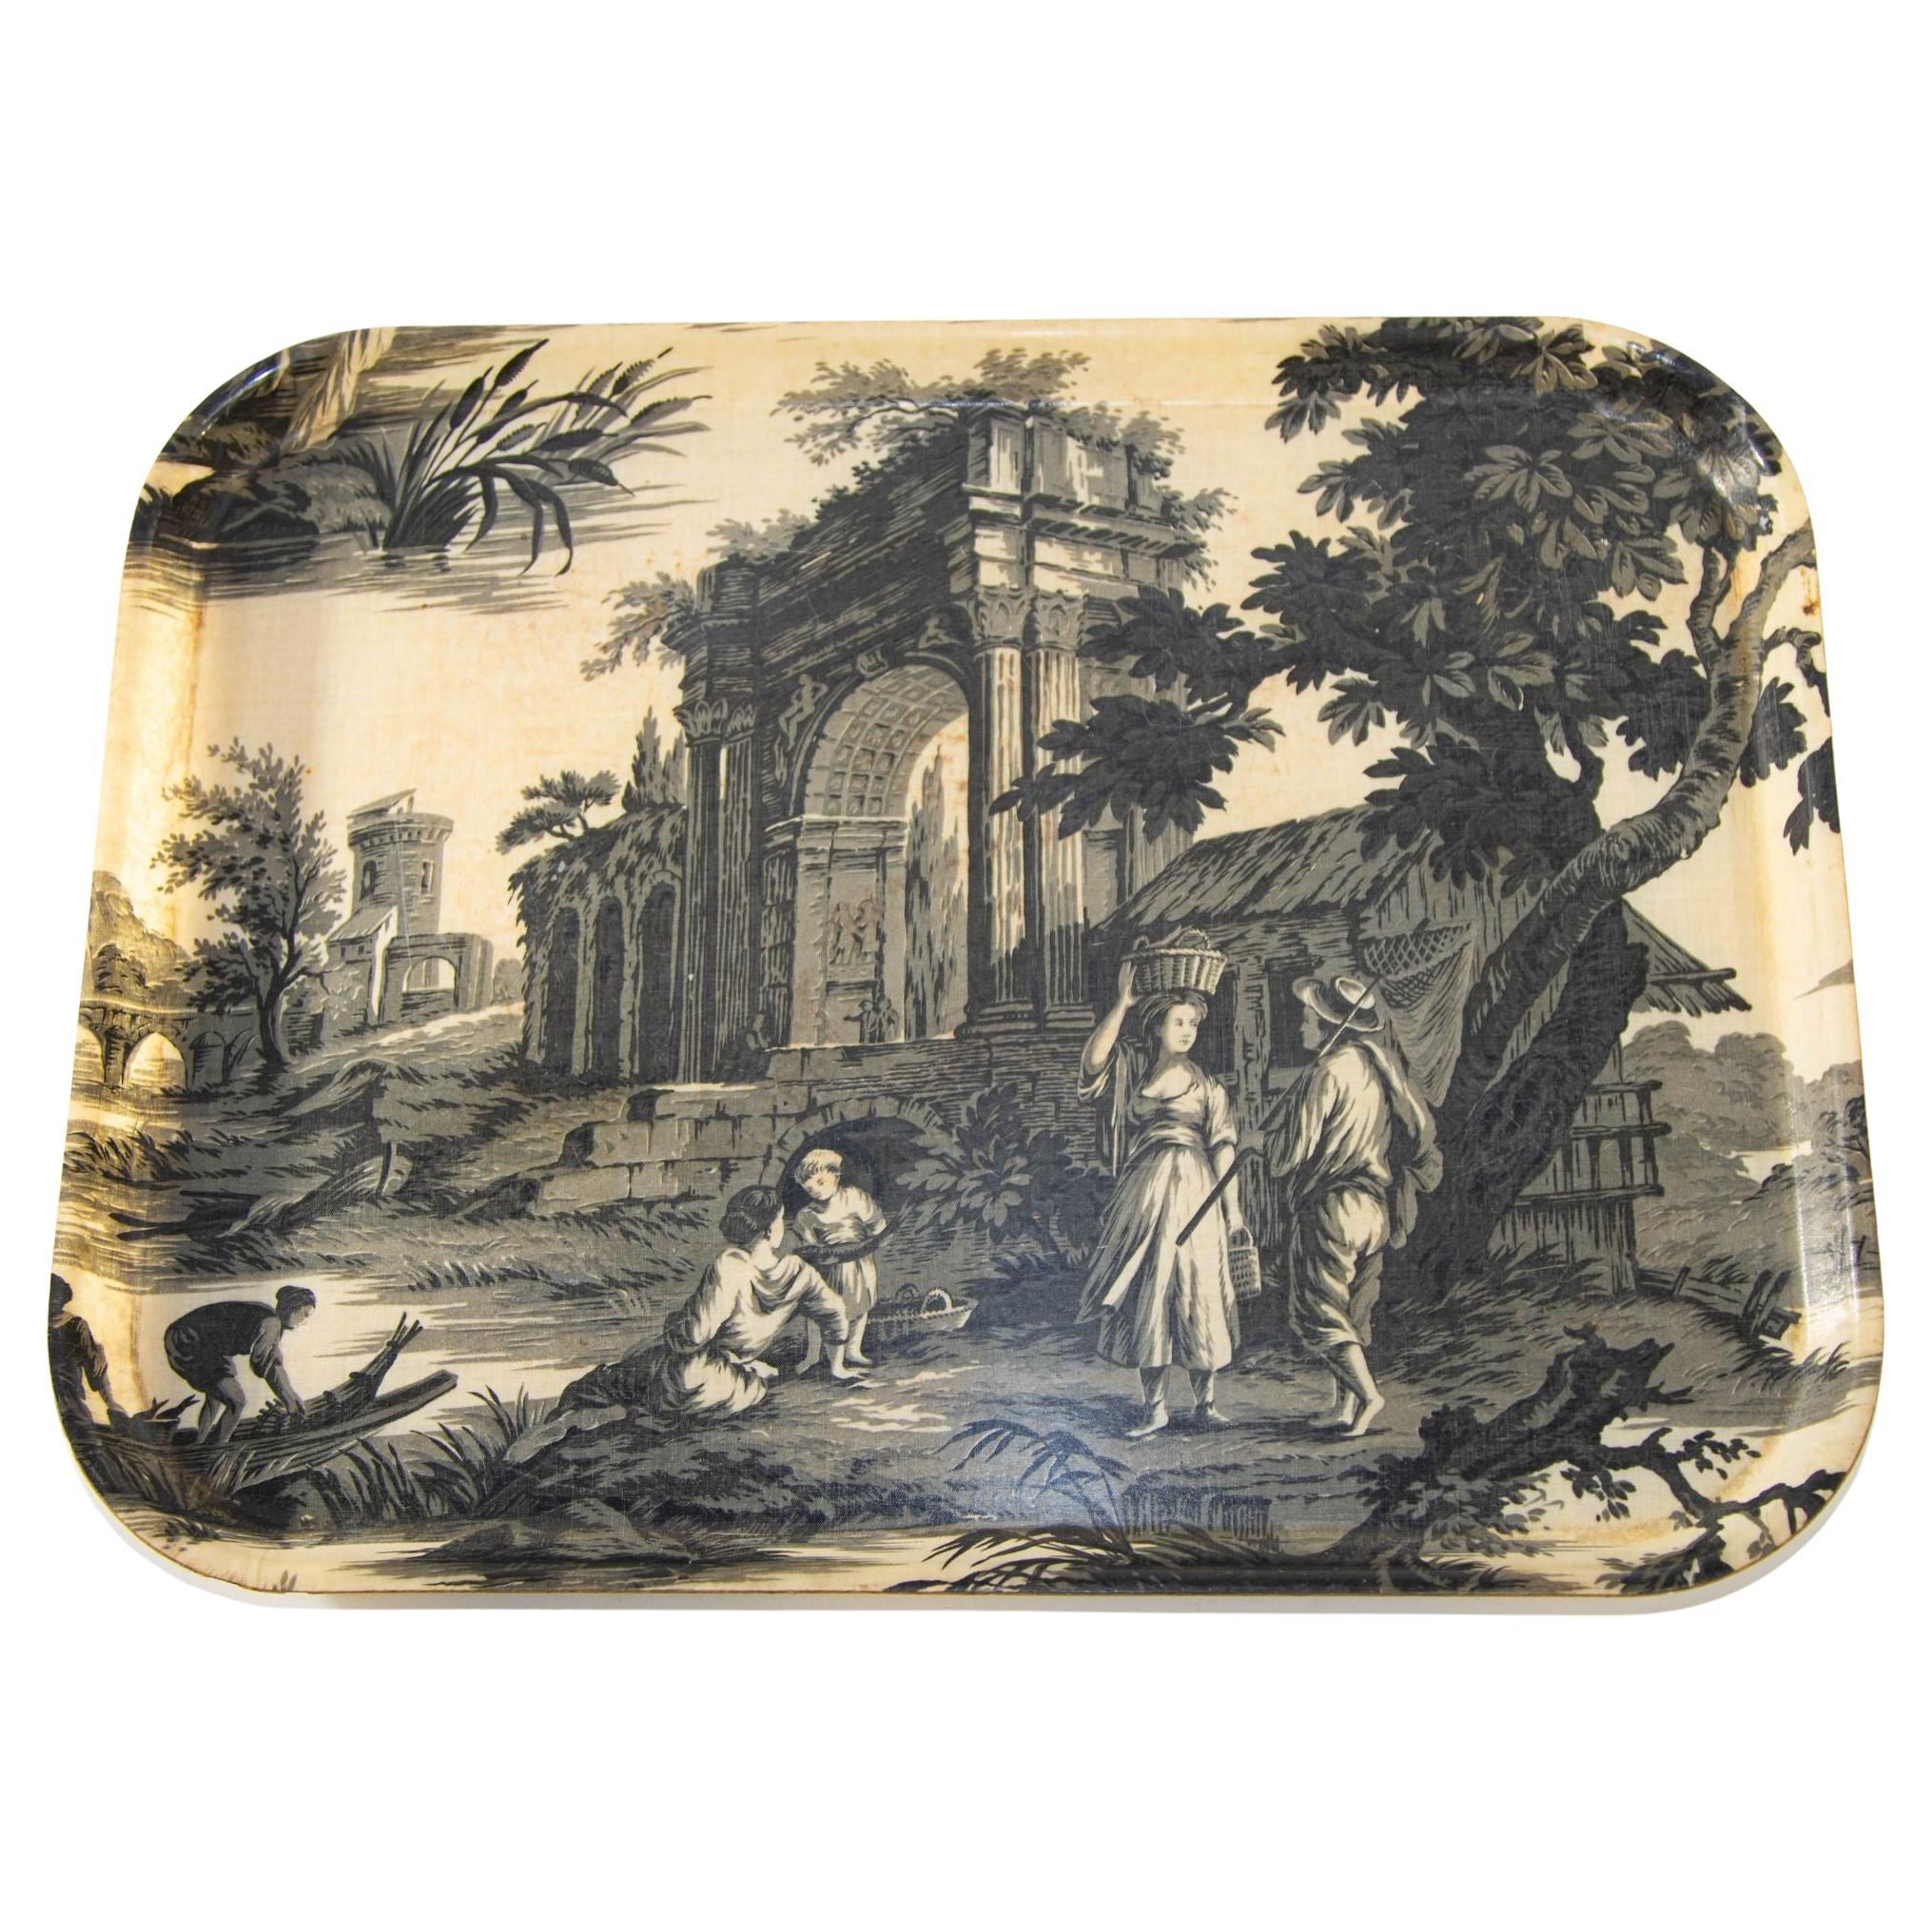 Vintage Large French Toile Pattern Fiberglass Tray with 19th Century Countryside